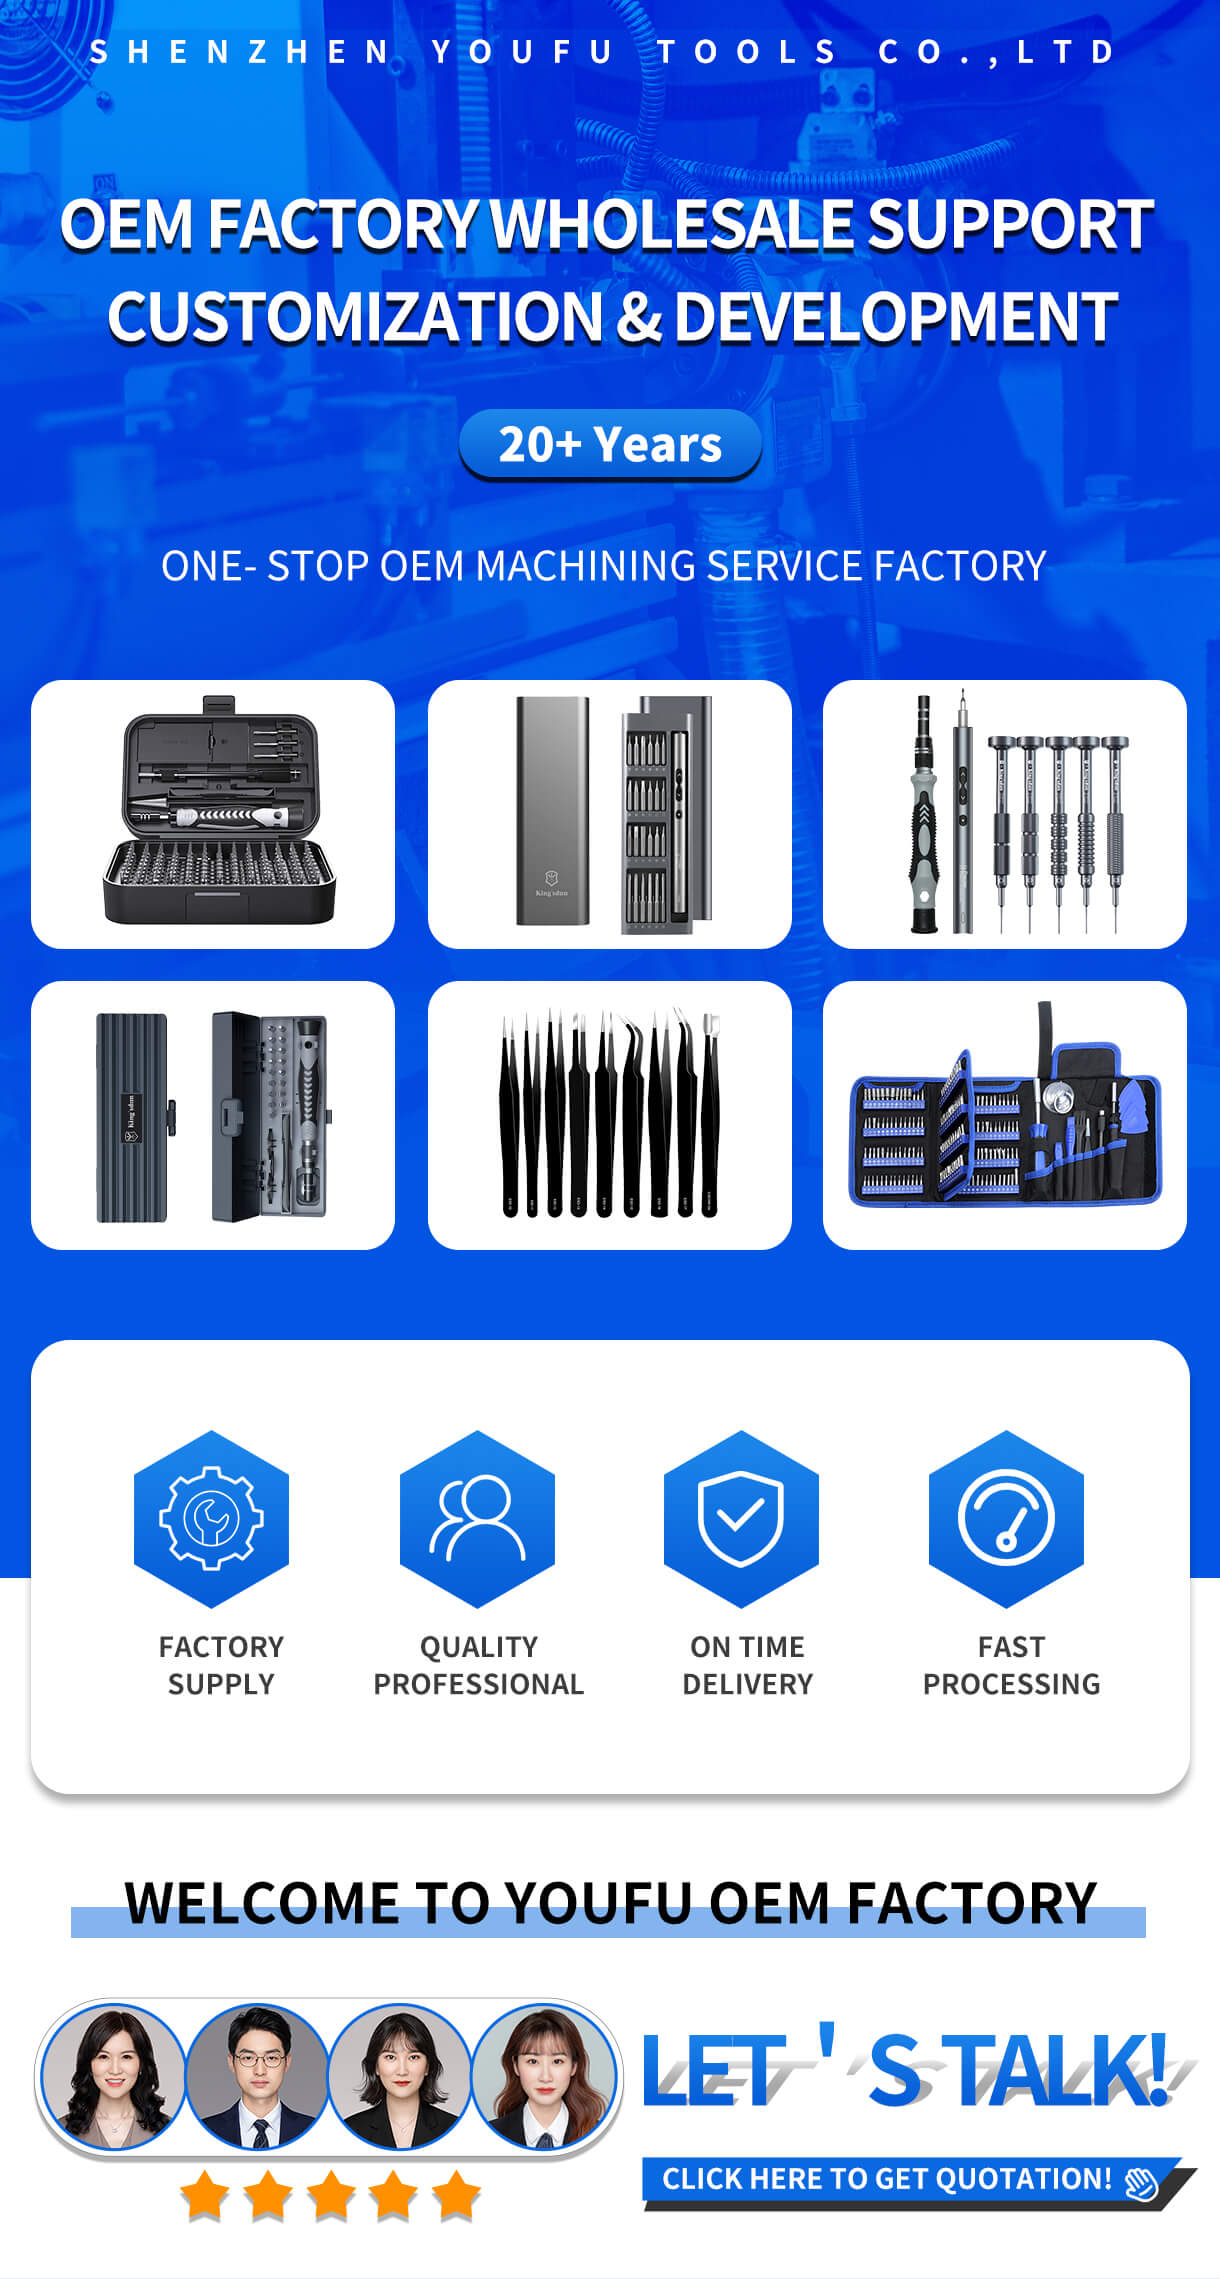 1.Multi-function applications: Mainly used in cell phone repair, aircraft models repair, automotive models repair, quality electronic equipment repair and so on. 2.Different types of screwdrivers to satisfy different needs. 3.All suits are placed in a box for easy st